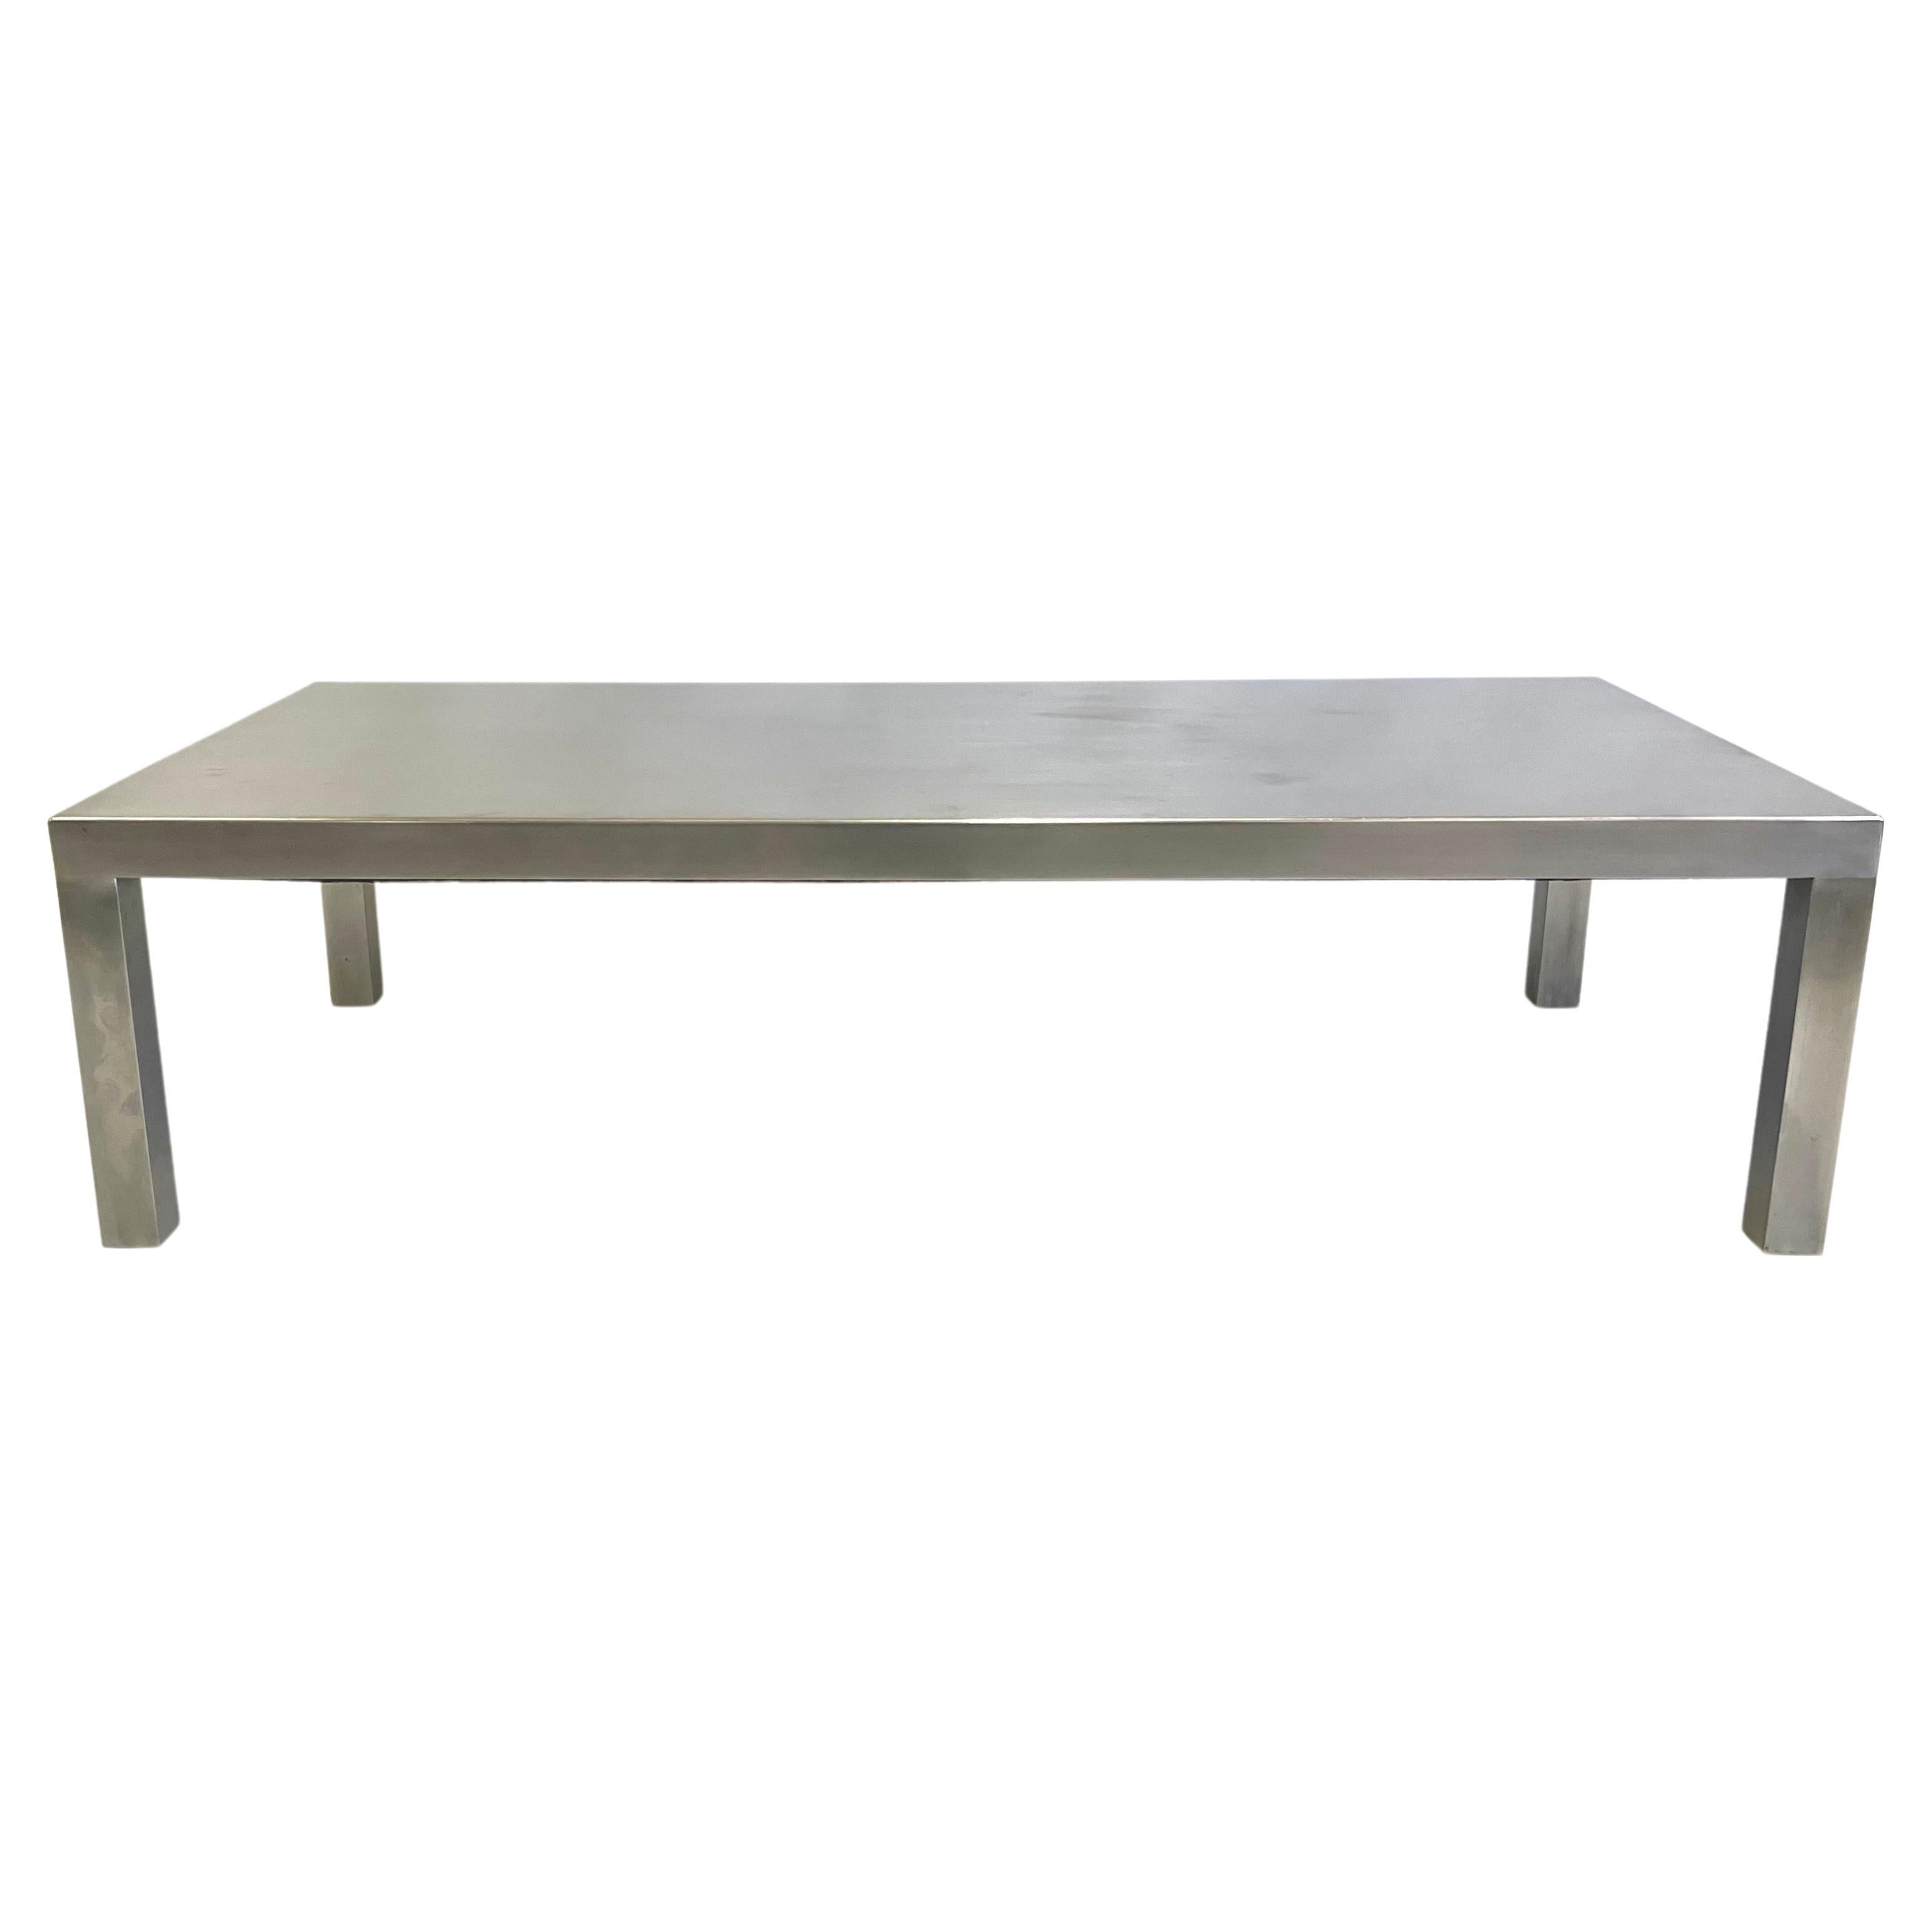 French Mid-Century Modern Matte Stainless Steel Coffee Table, Maria Pergay, 1971